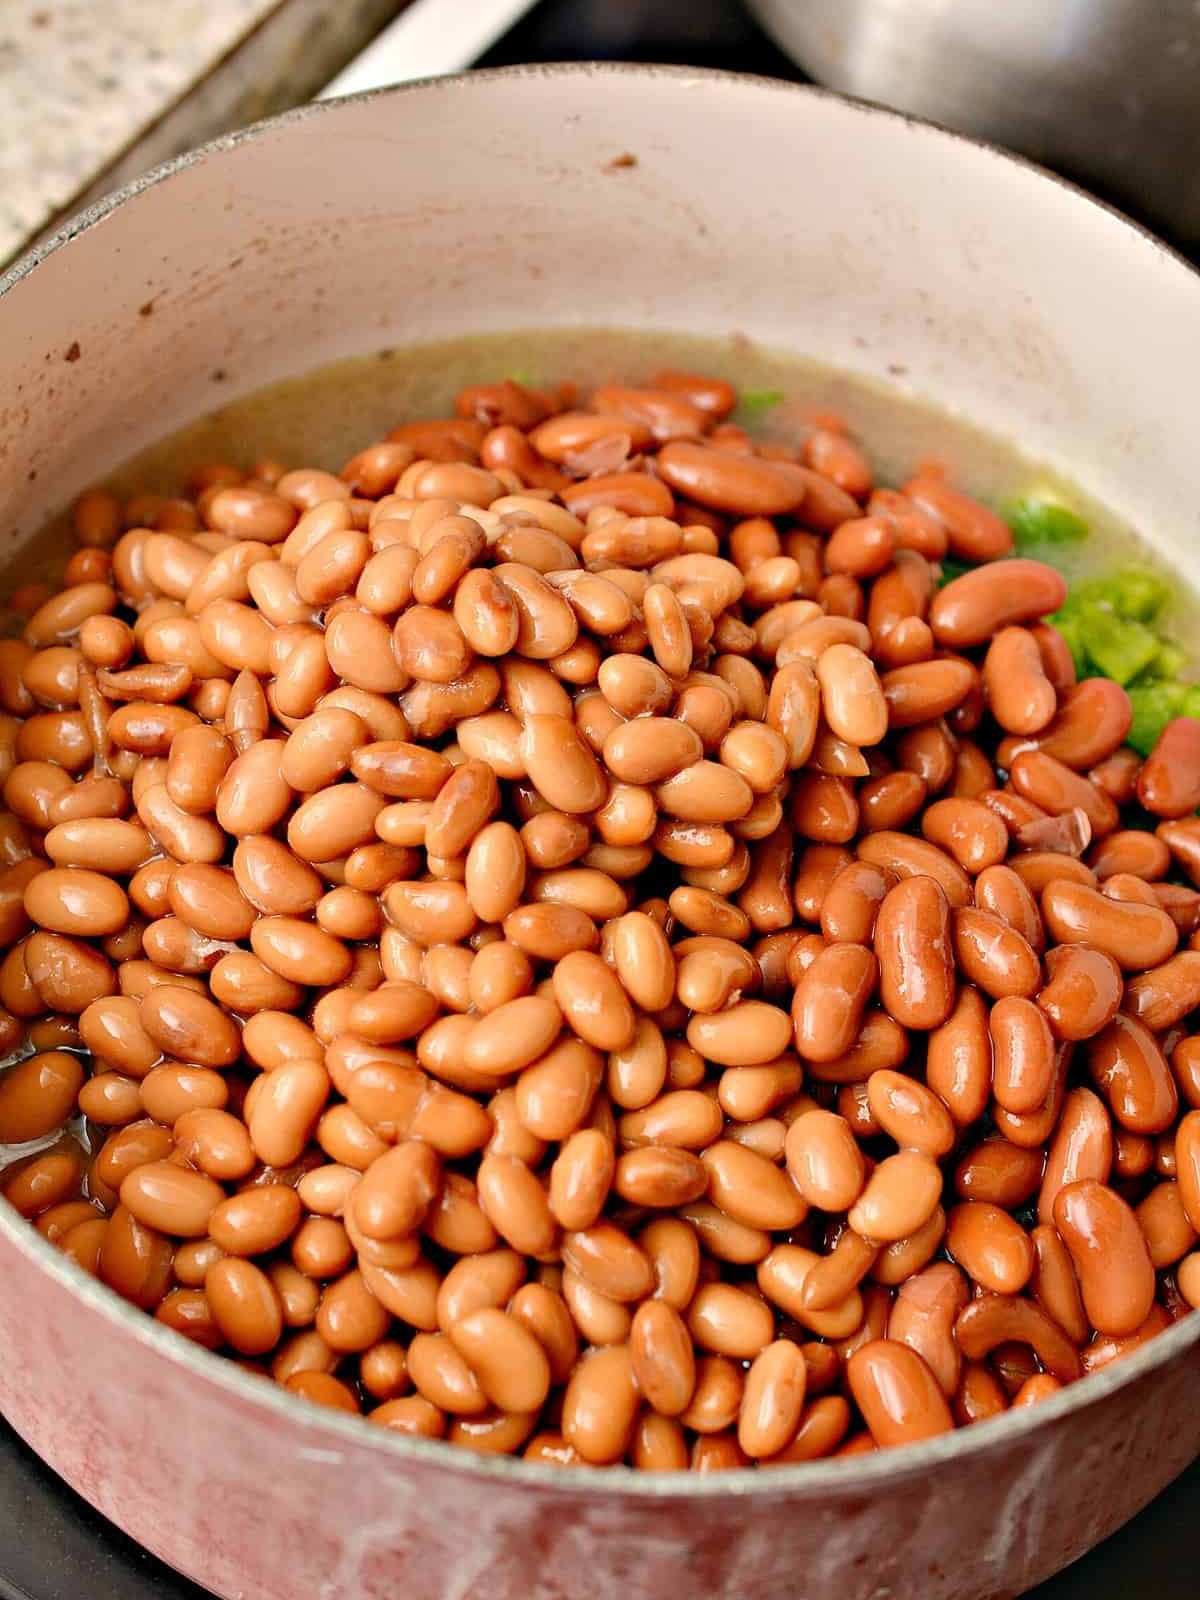 Add 2 cans of pinto beans not drained and 2 cans of kidney beans not drained.